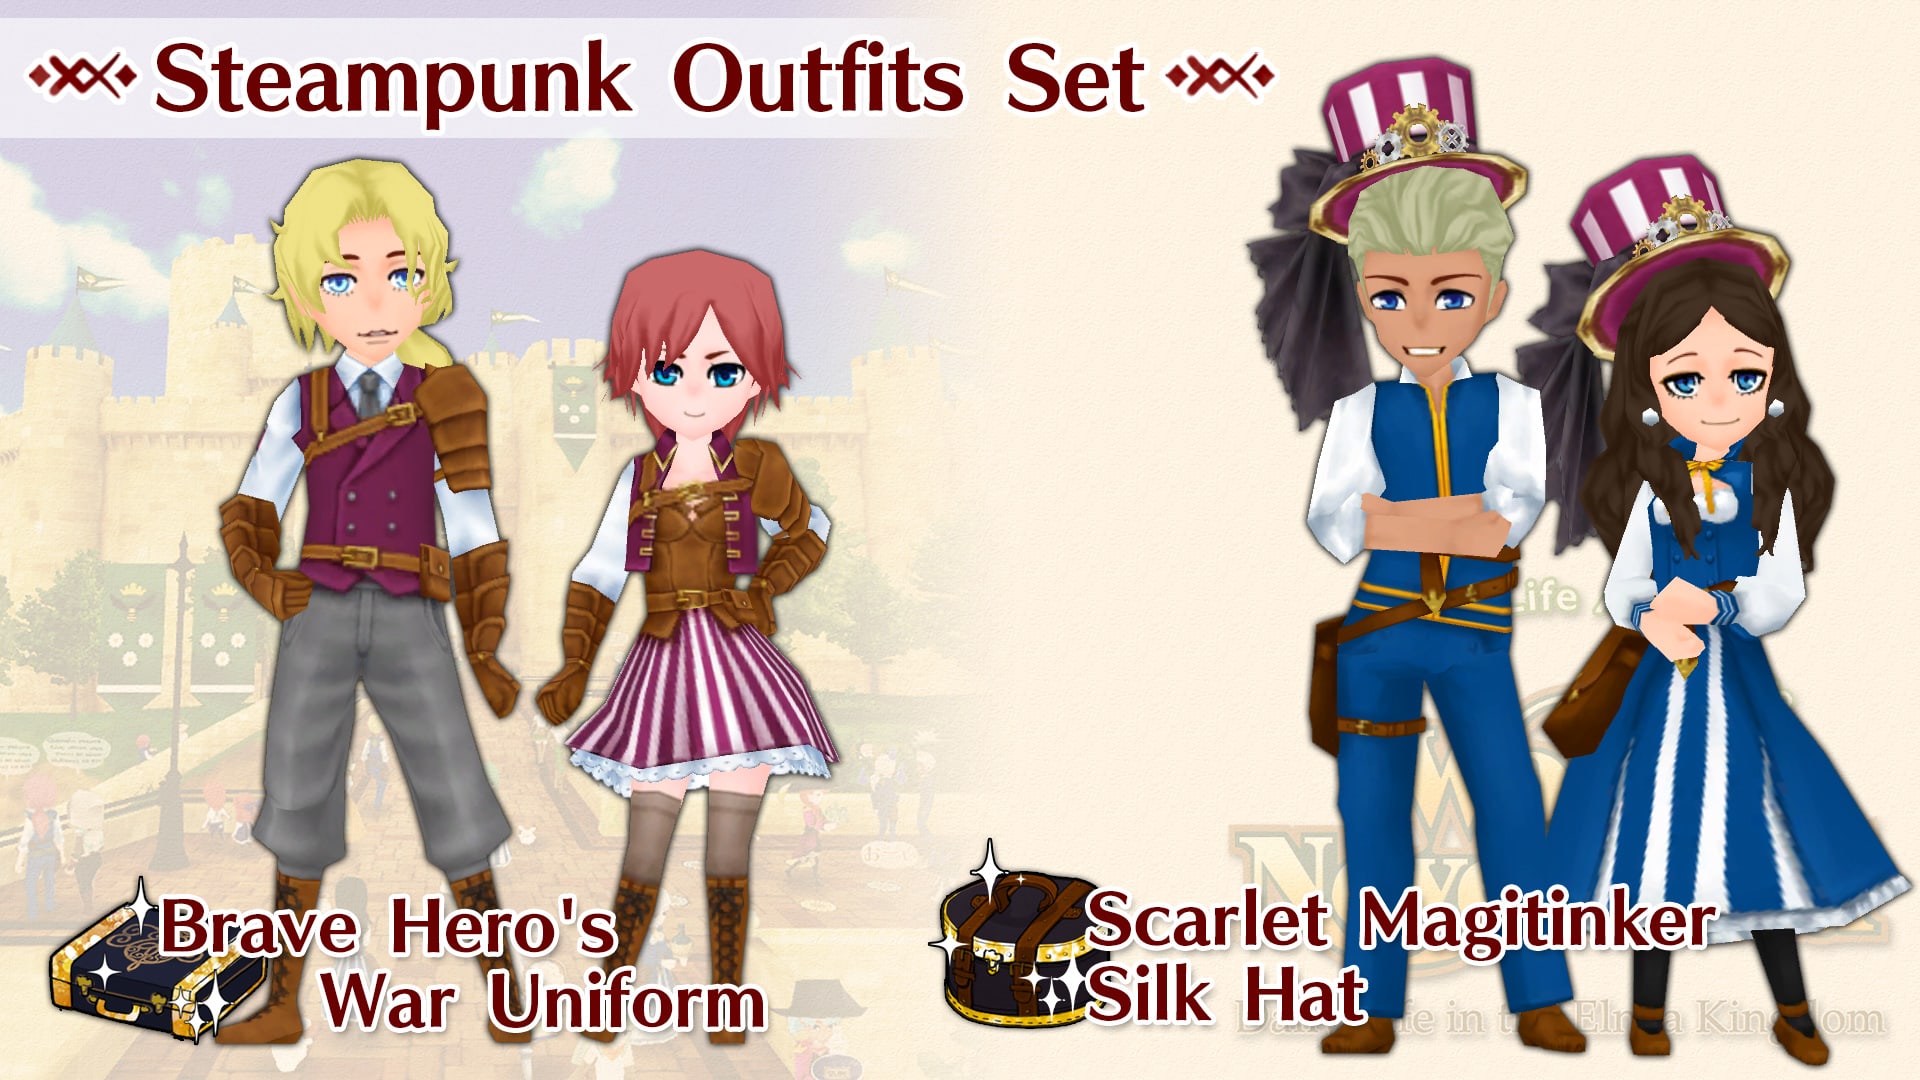 Steampunk Outfits Set